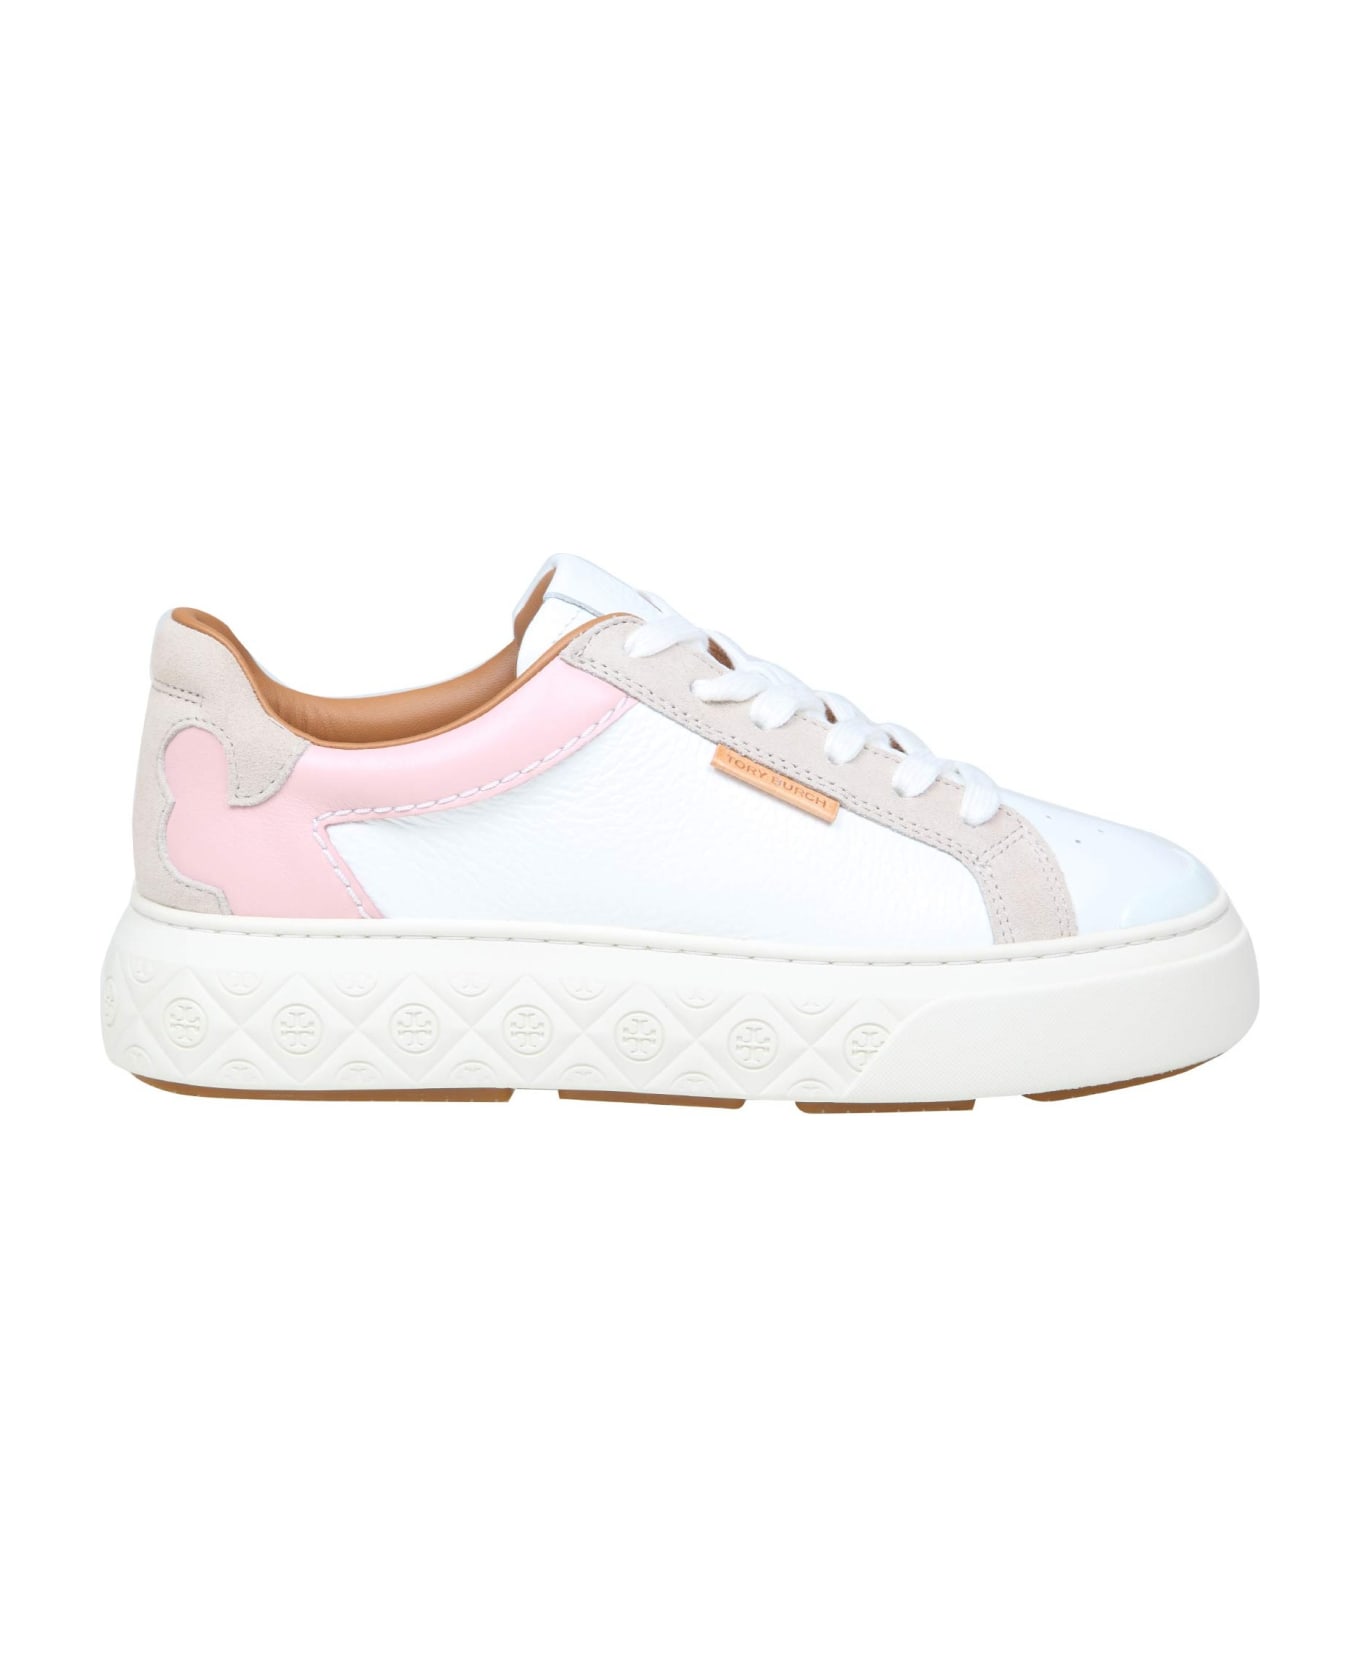 Tory Burch Ladybug Sneakers In White And Pink Leather - White/Rose